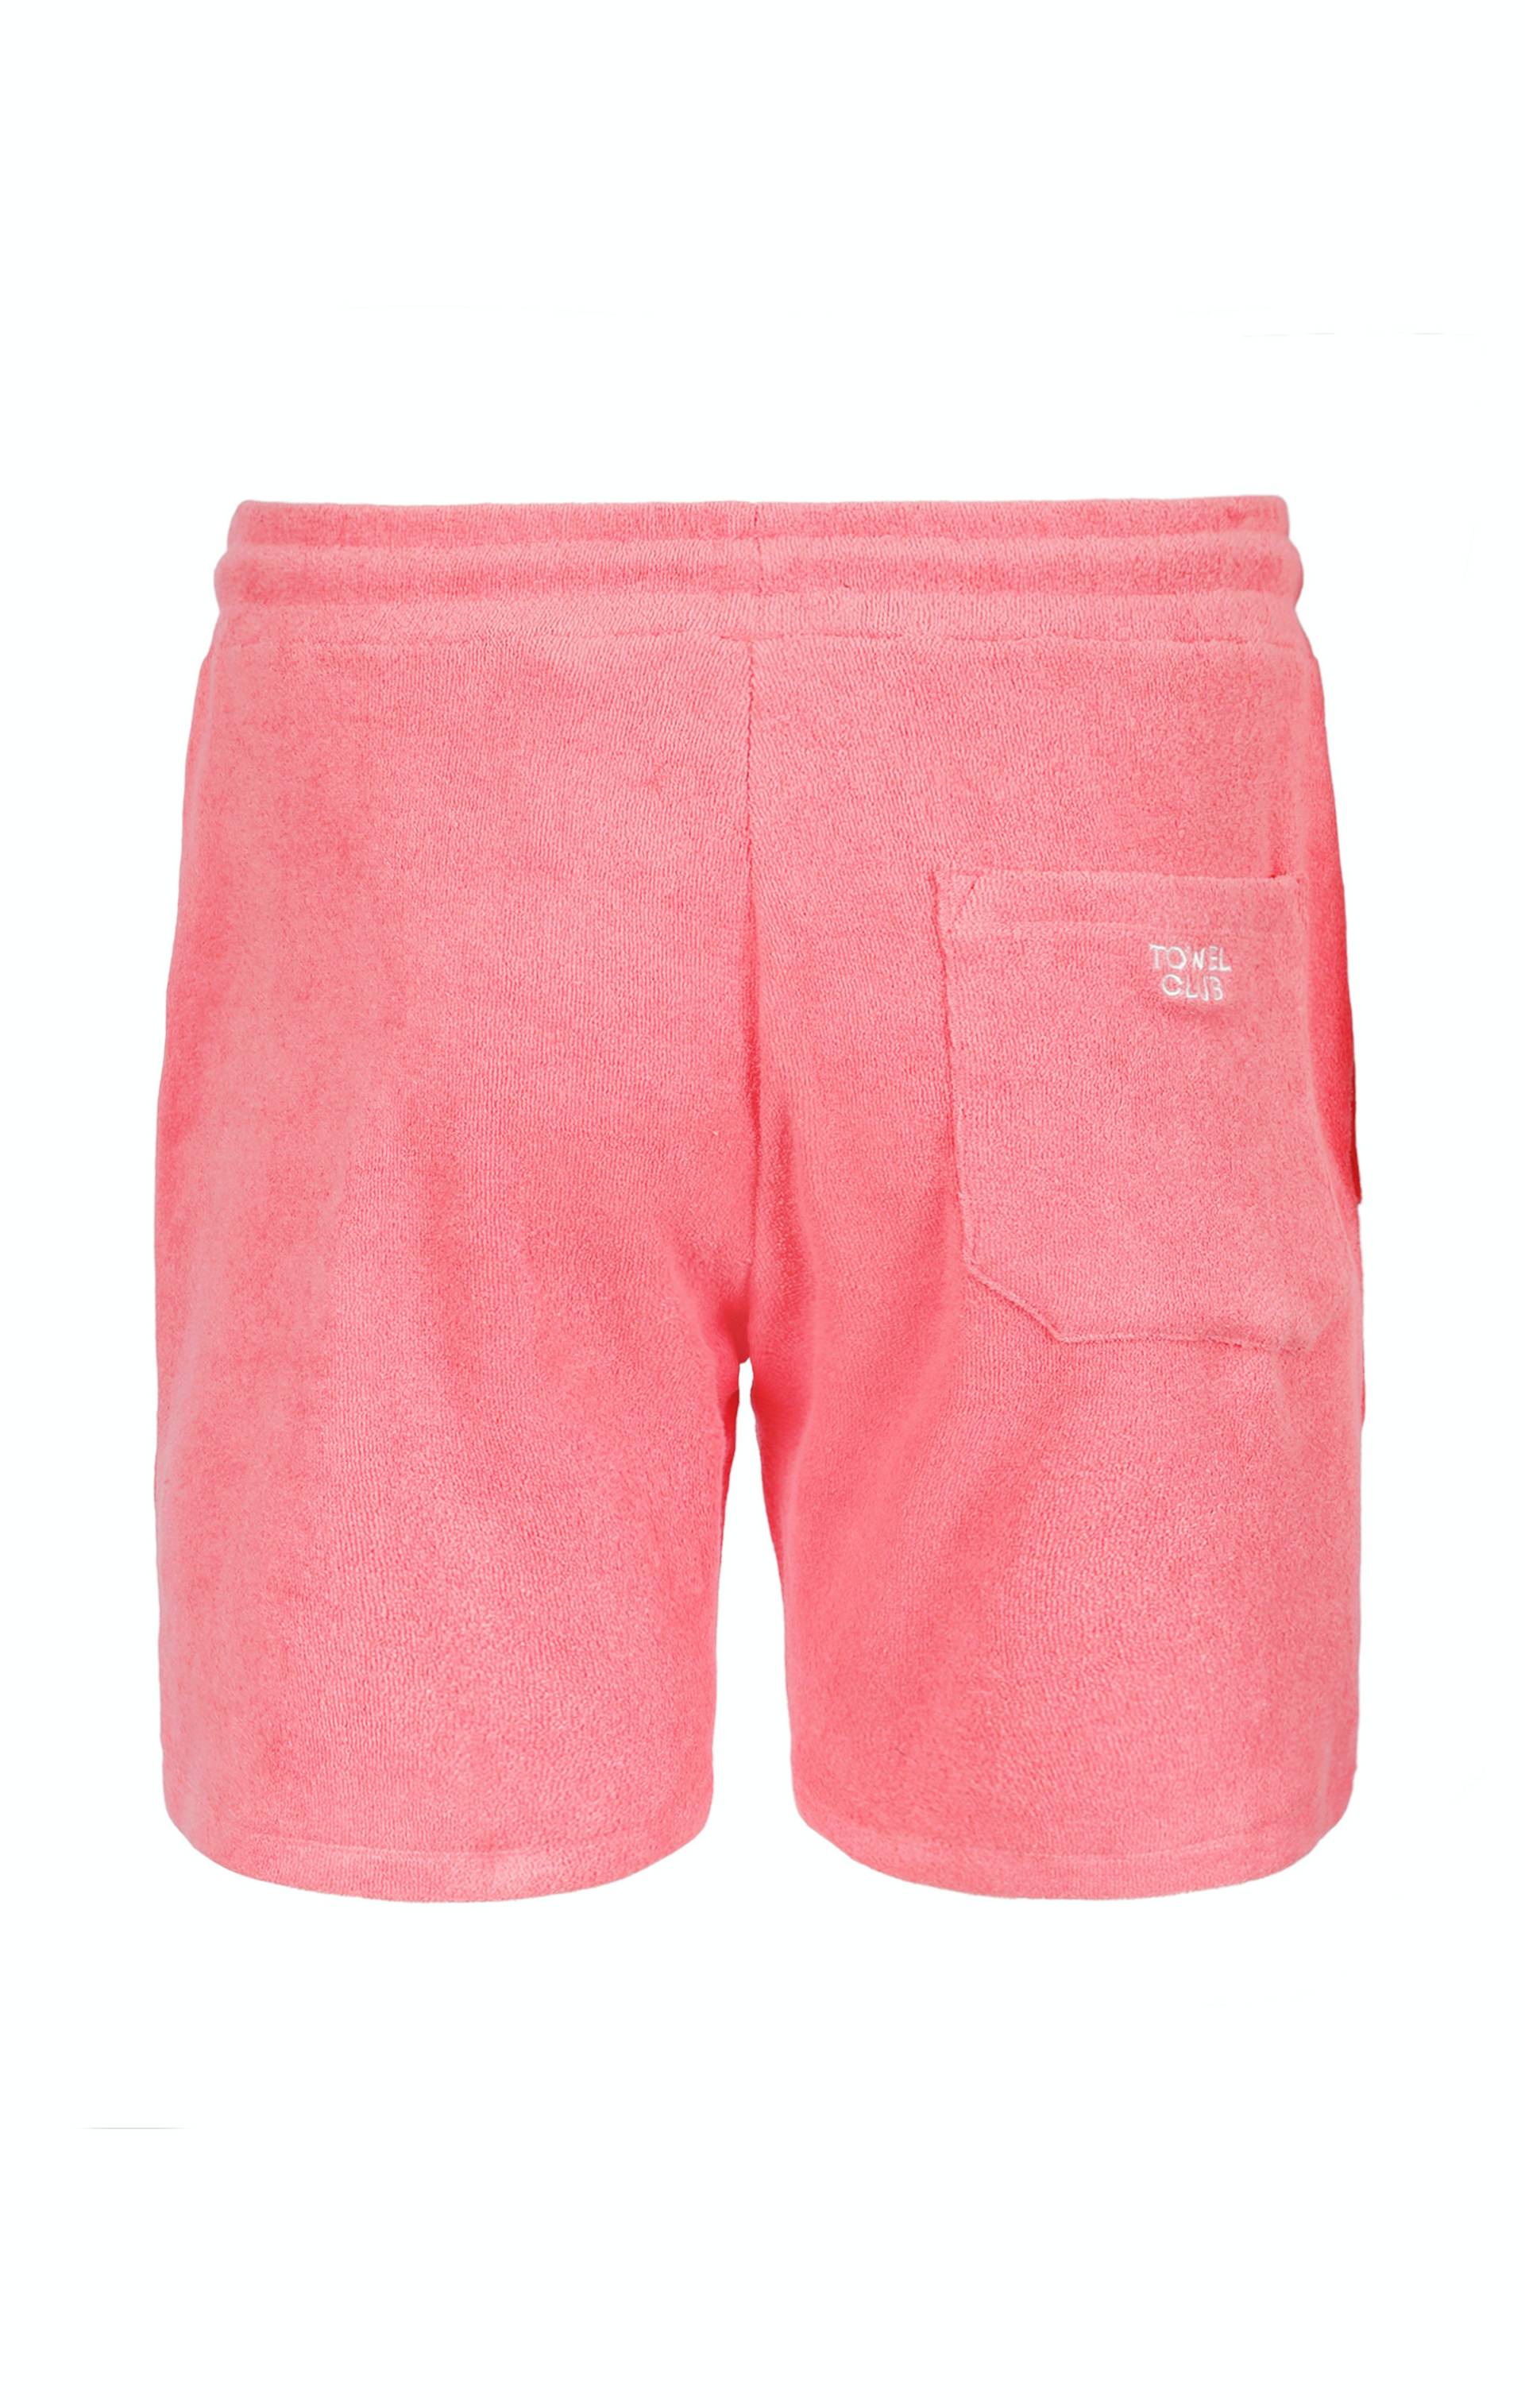 Onepiece Towel Club Shorts Coral - 11